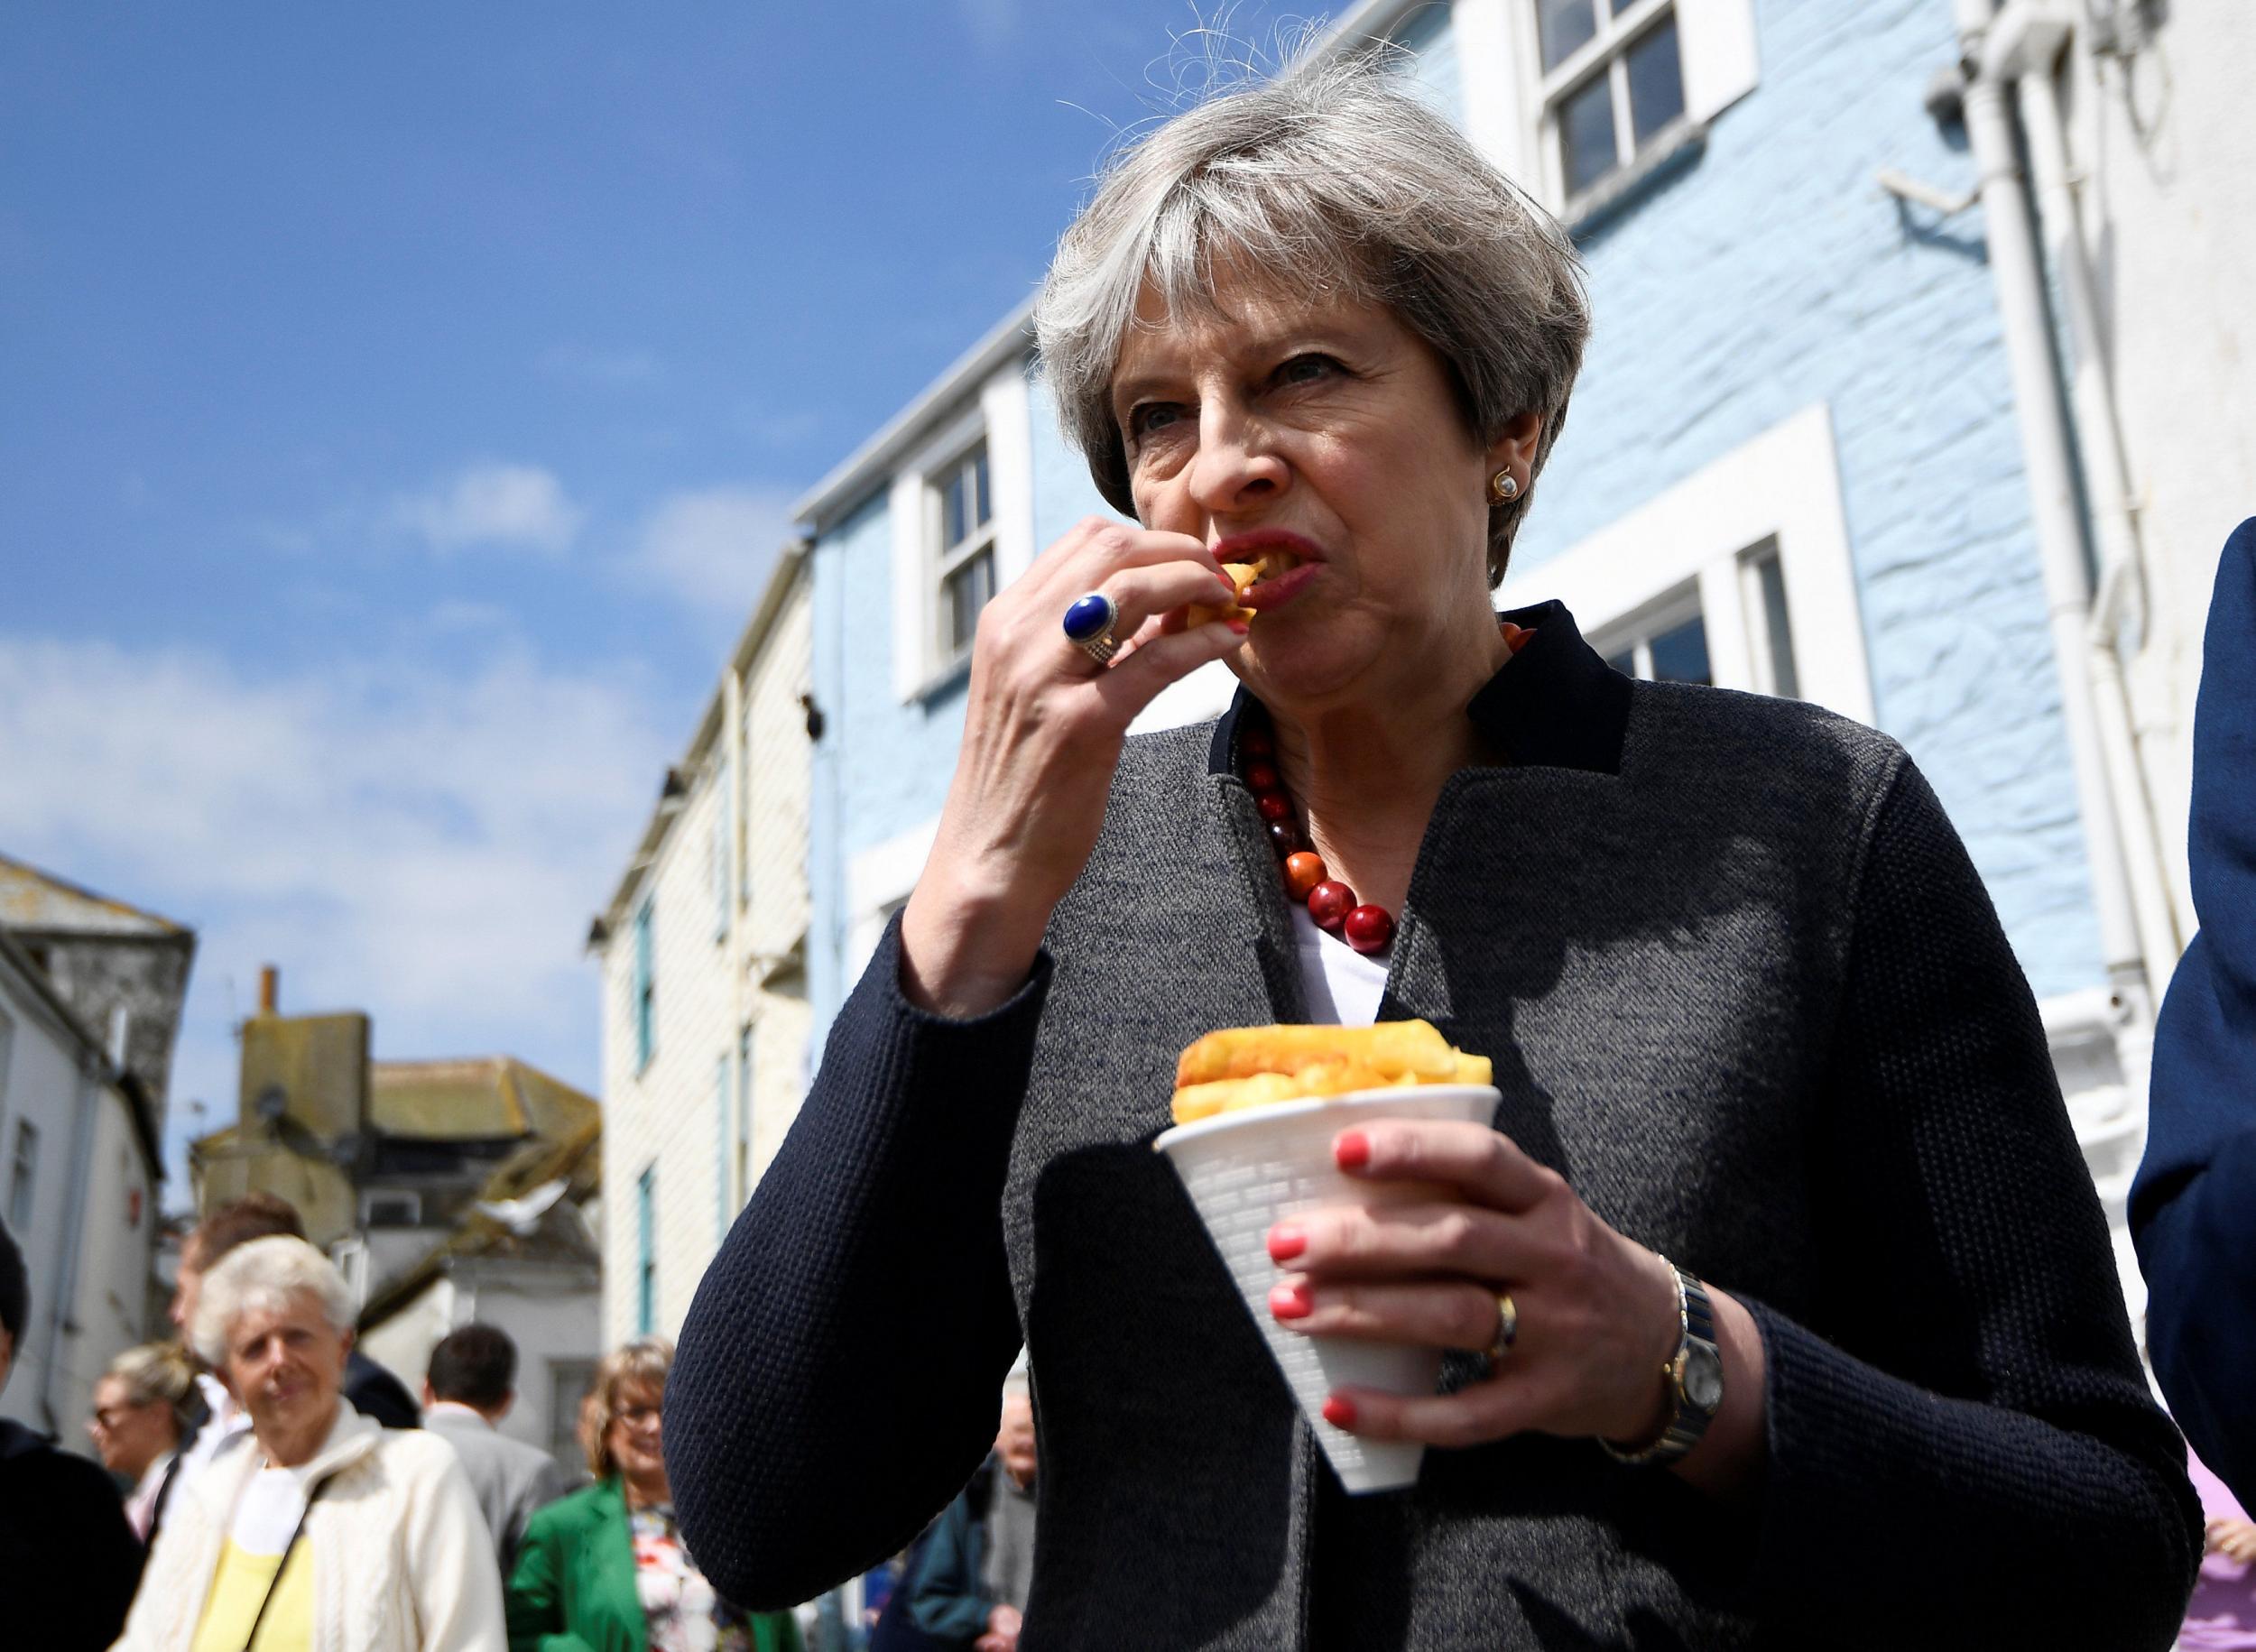 The Prime Minister eating a chip with complete revulsion